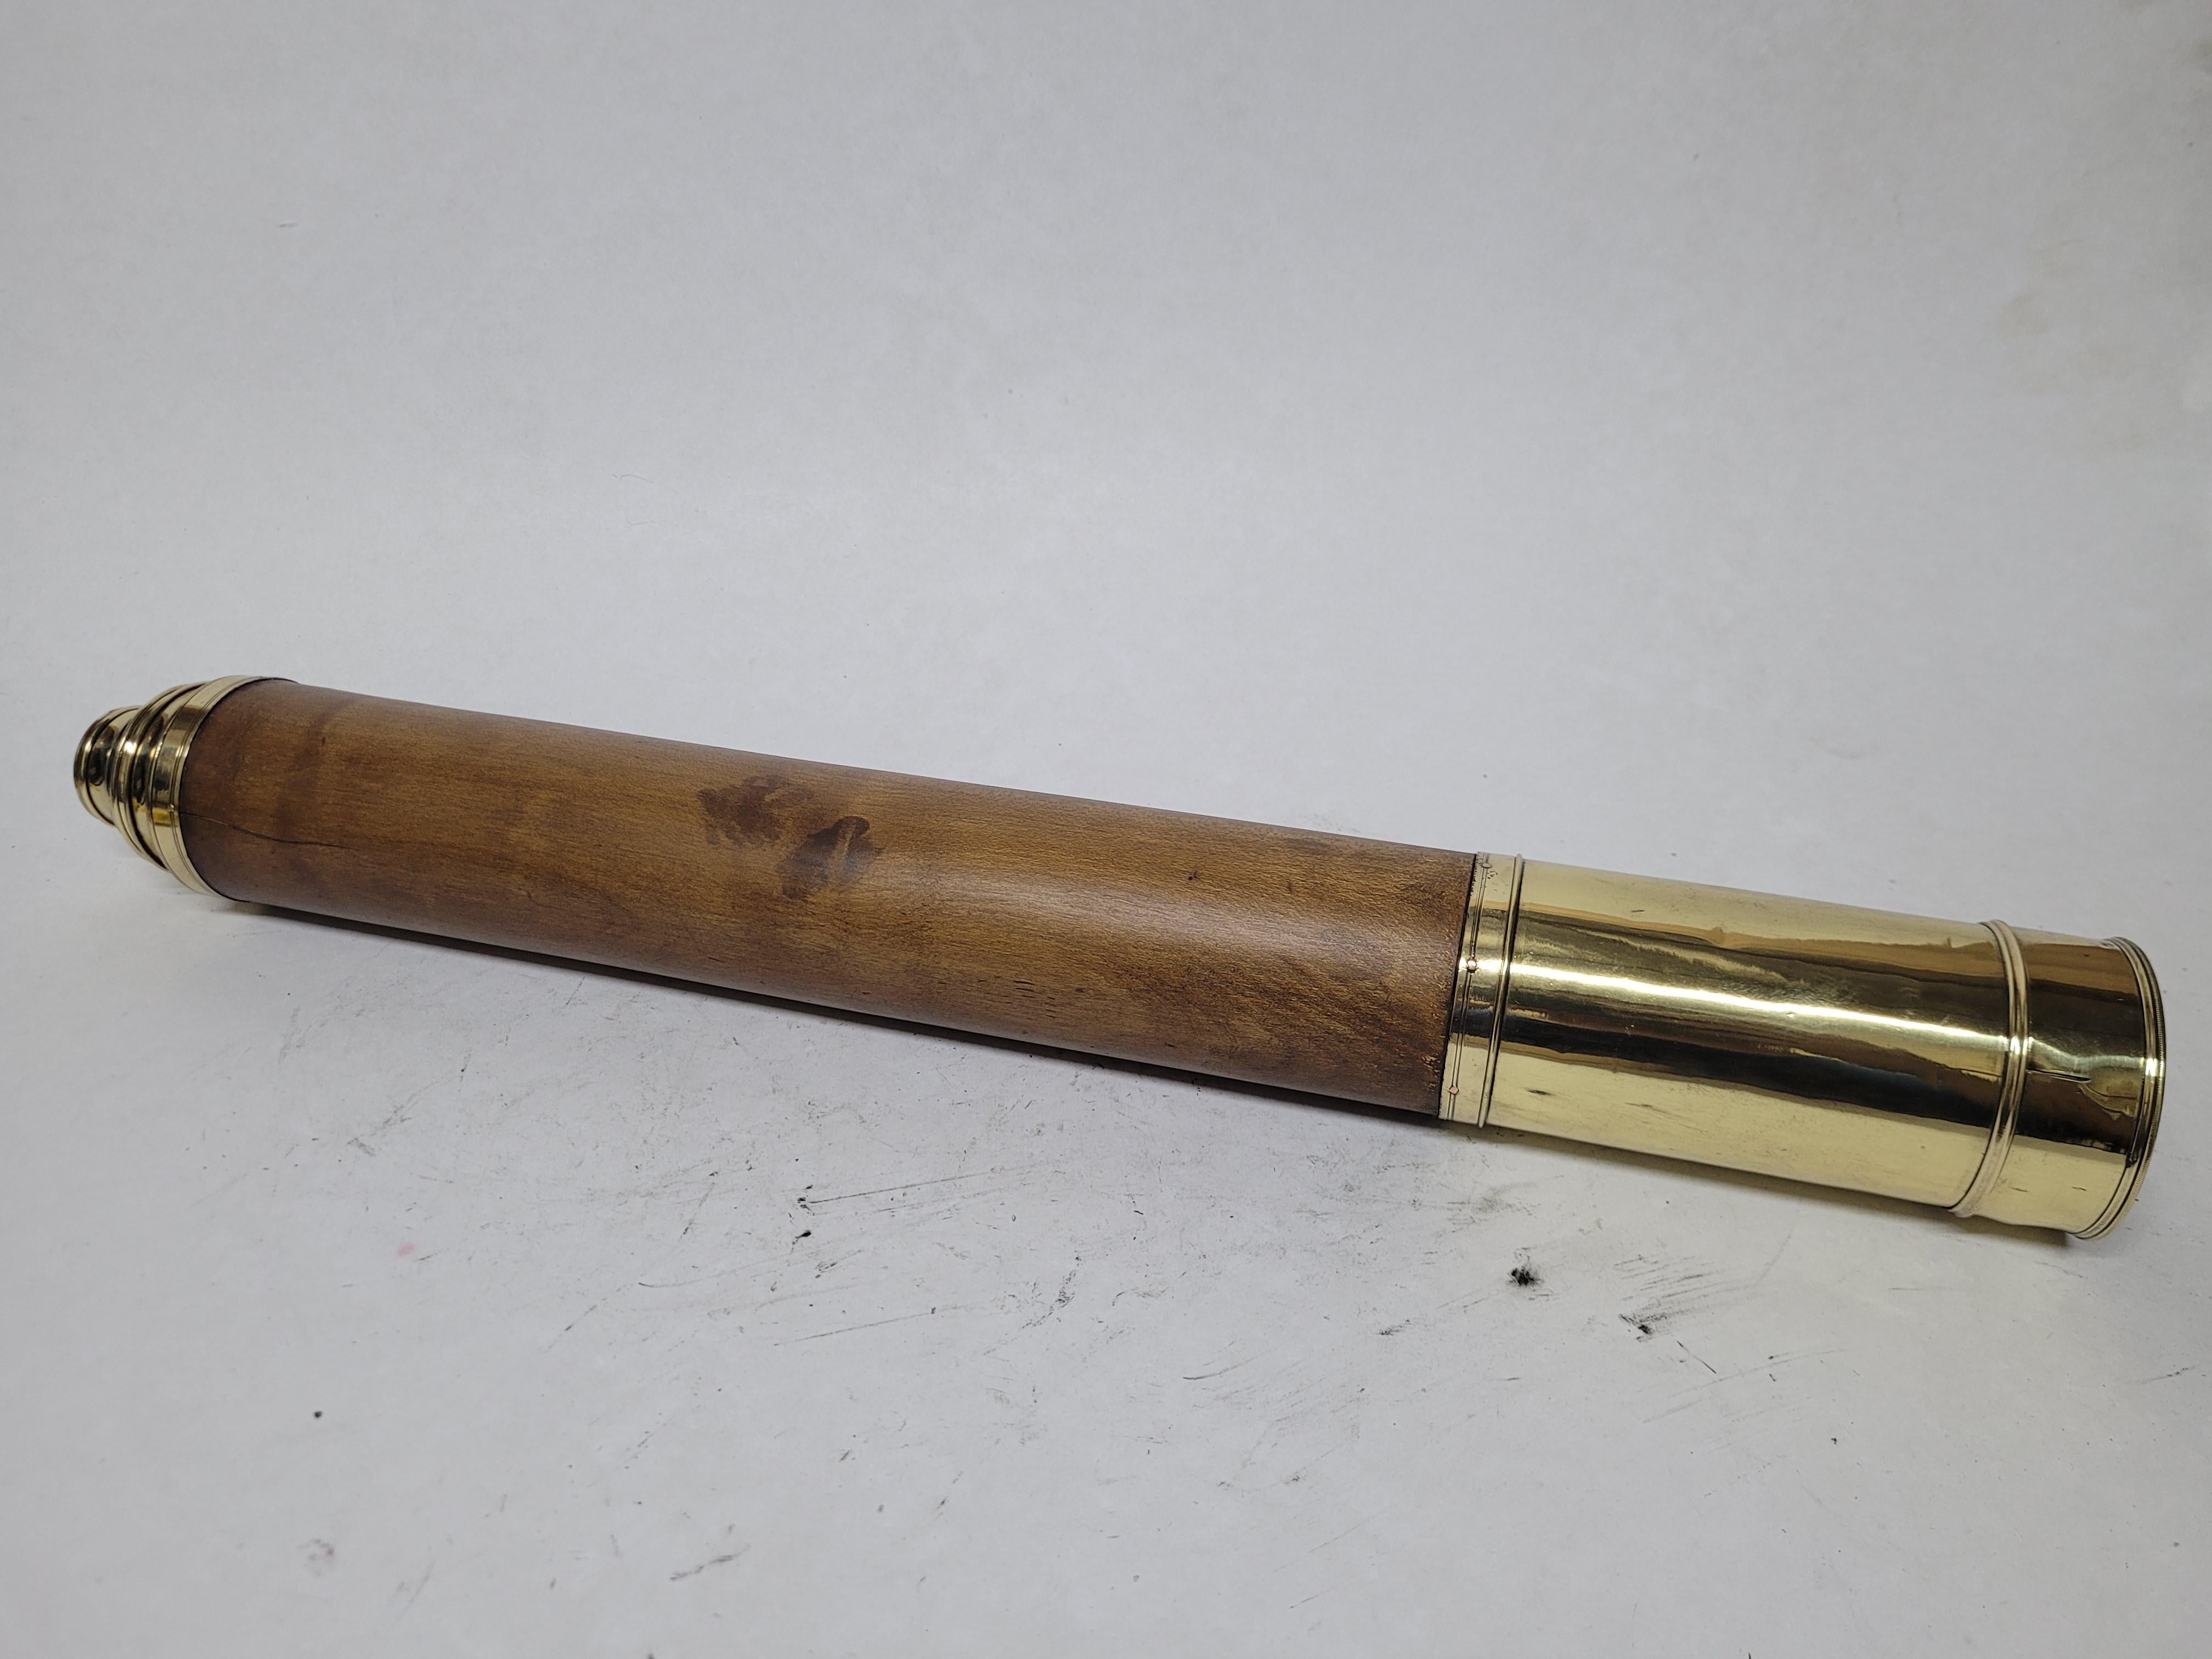 Ships spyglass telescope appropriate for use on a yacht, ship, or anywhere with a view. This has been meticulously polished and lacquered. We just restored a great collection of these. This fine instrument has a varnished wood barrel of elmwood, and